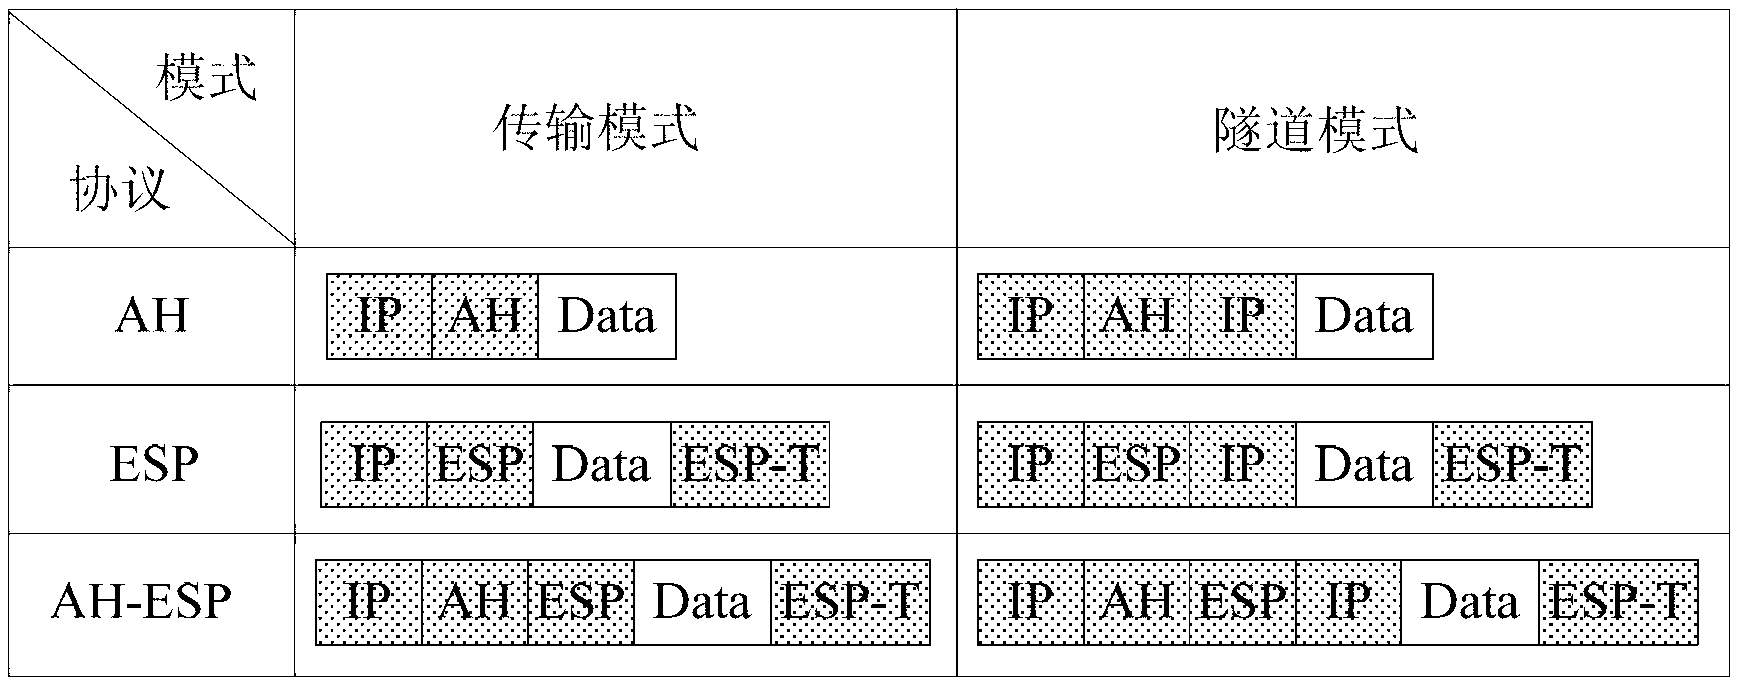 Method for IPSec (Internet protocol security) tunnel to rapidly process messages